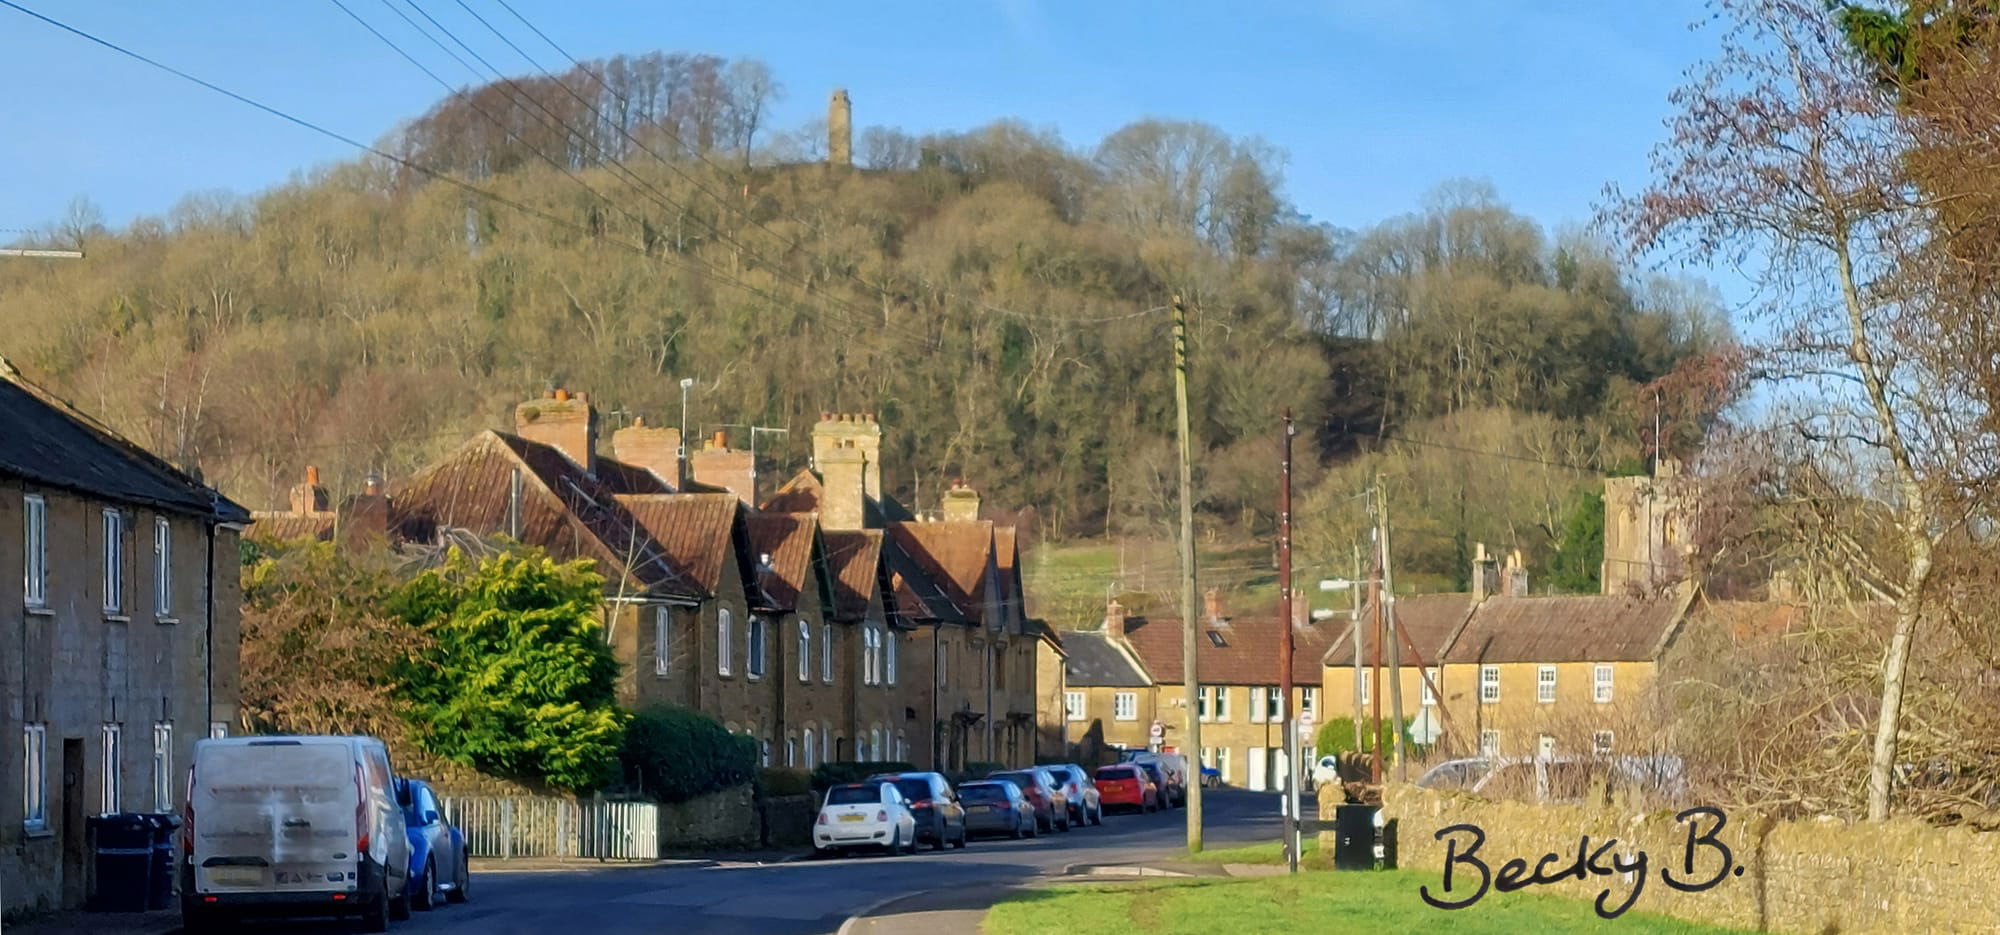 Colour photo taken looking westwards along Yeovil road from just after Montacute Garage. The left side of the road is lined with sand-coloured hamstone houses and also parked cars. Ahead (where the road bears round to the right) there are more houses and also two on the right side. Looming over the scene is St Michael’s Hill topped by the tall hamstone tower. The sky is blue and there are no leaves on the deciduous trees on the hill, giving the impression of a bright and crisp winter’s day. The photo is signed ‘Becky B’ in the bottom right corner. 